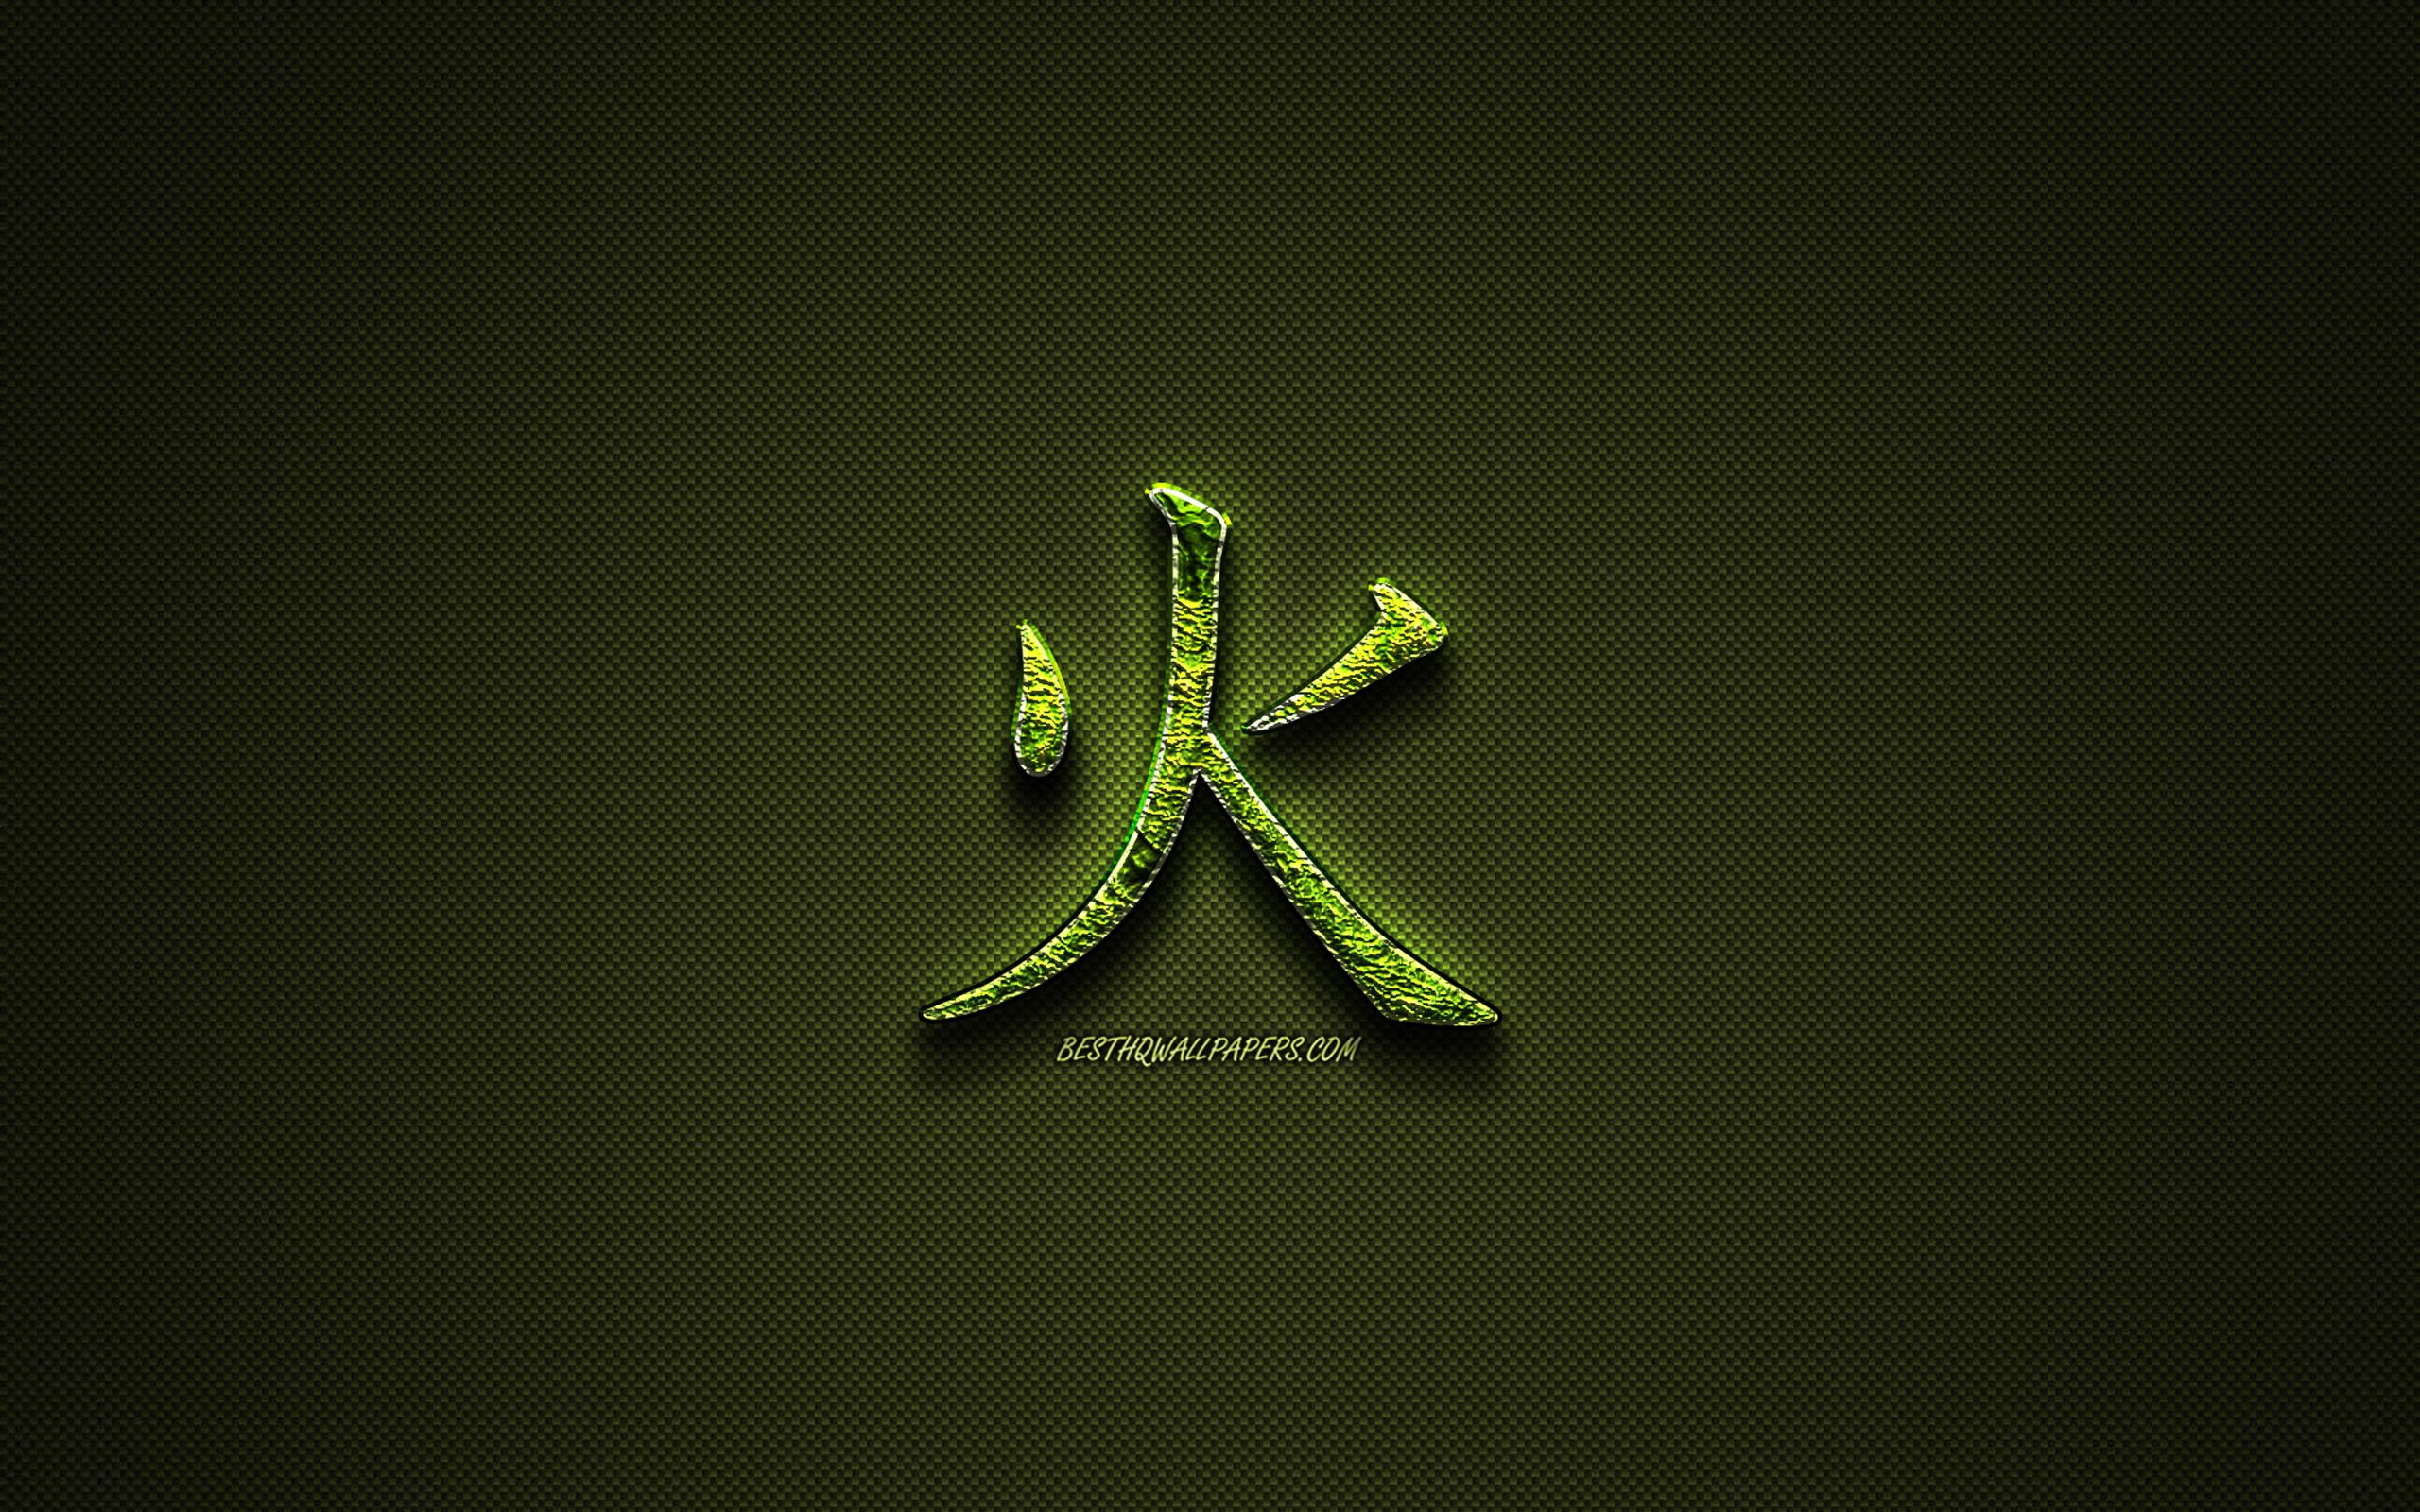 Download wallpaper Fire Kanji hieroglyph, green floral symbols, Fire Japanese Symbol, japanese hieroglyphs, Kanji, Japanese Symbol for Fire, grass symbols, Fire Japanese character for desktop with resolution 2560x1600. High Quality HD picture